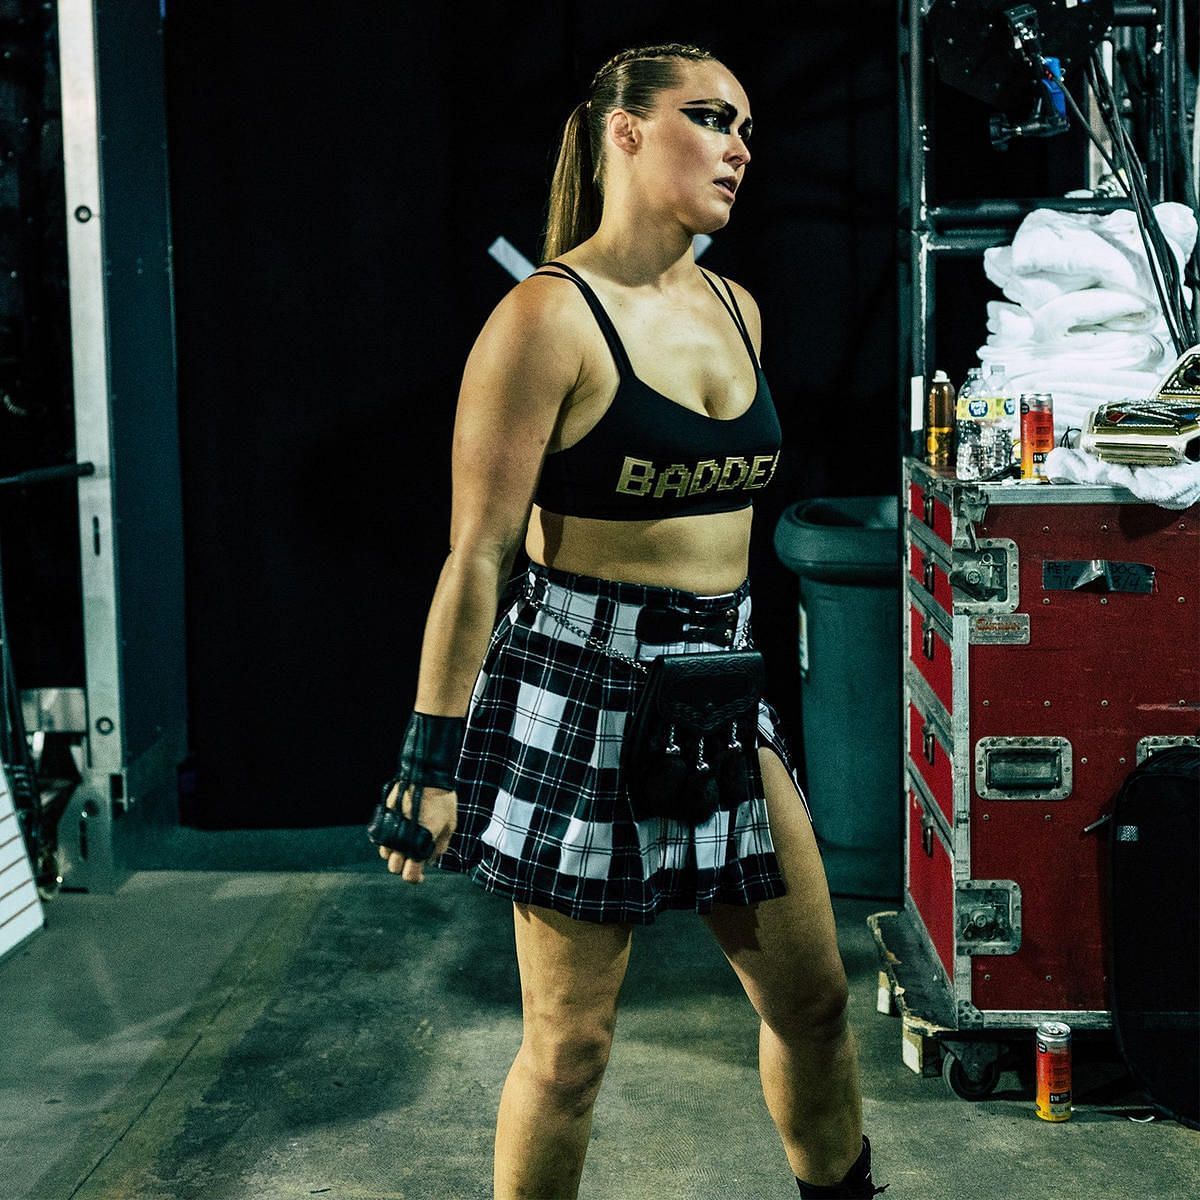 Ronda Rousey had a major match scheduled